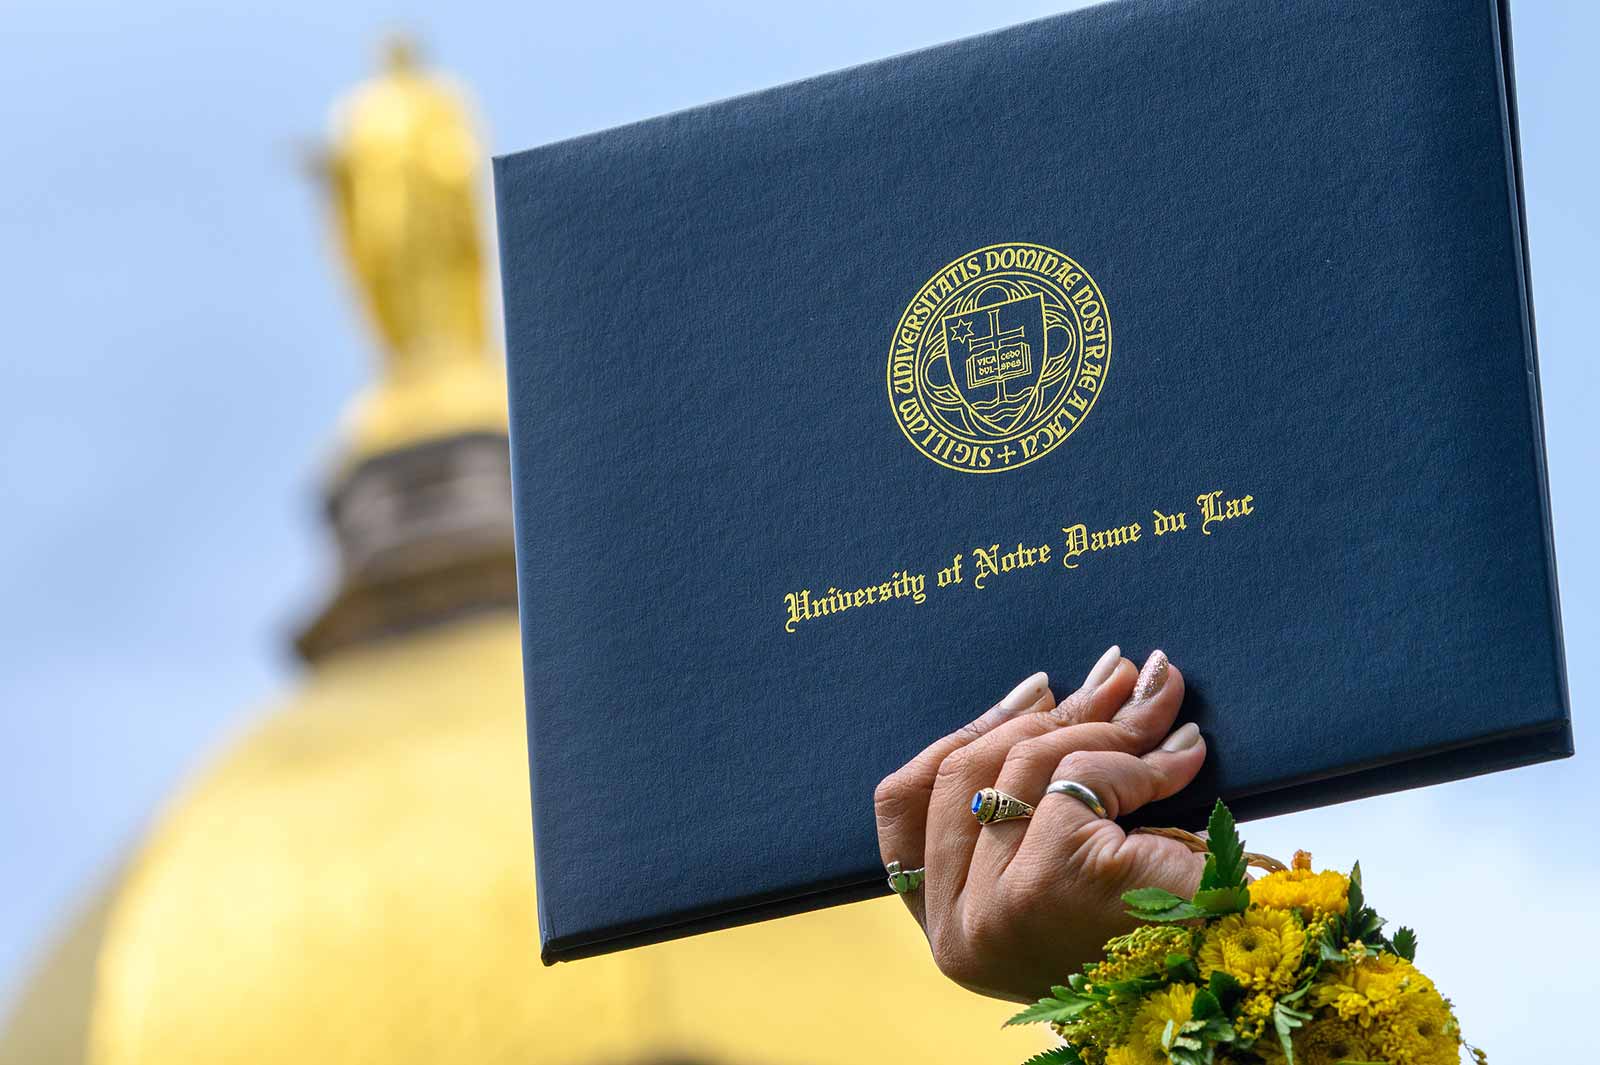 In the background the Golden Dome is out of focus. In the foreground a close up of someone's hand, wearing rings and a wrist corsage, holds onto a blue leather Univerty of Notre Dame diploma folder.